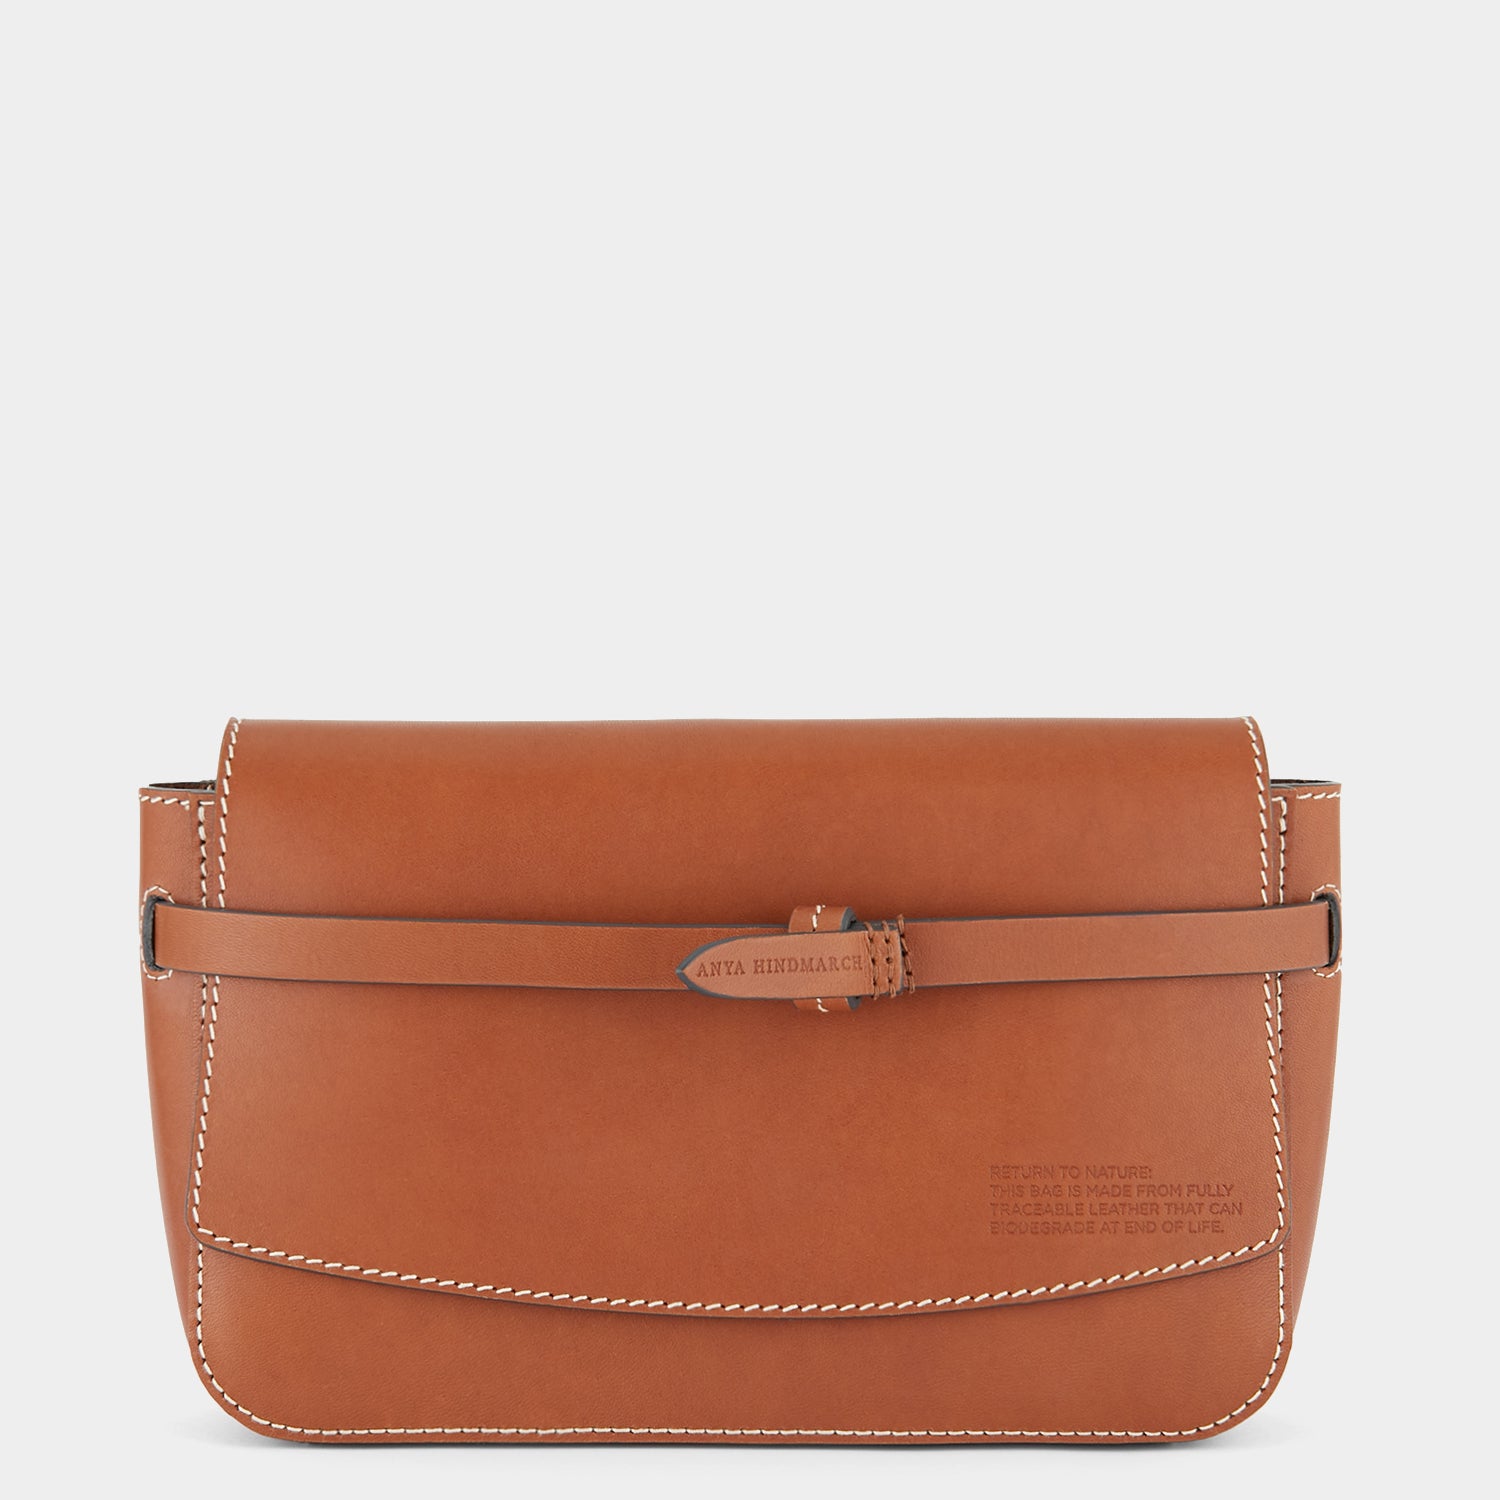 Return to Nature Clutch -

                  
                    Compostable Leather in Tan -
                  

                  Anya Hindmarch UK
